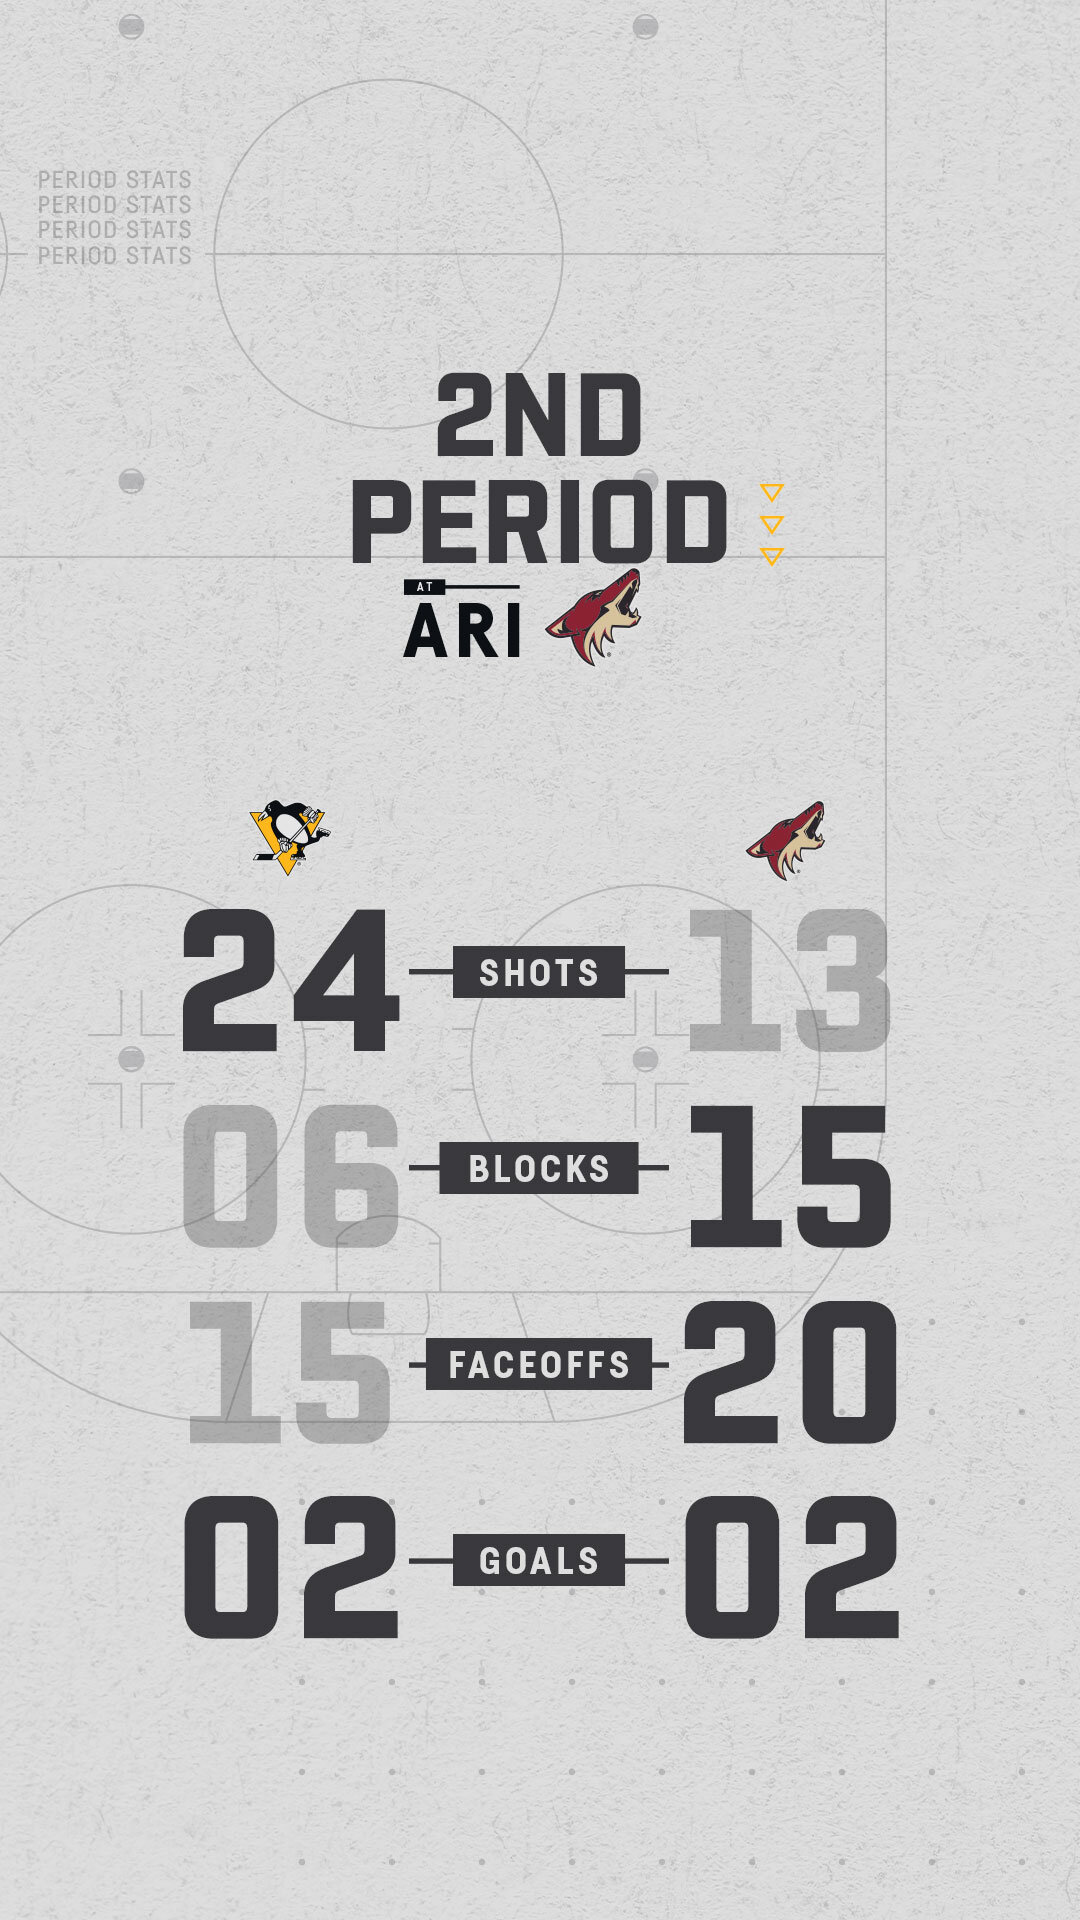 2nd Period Stat Graphic